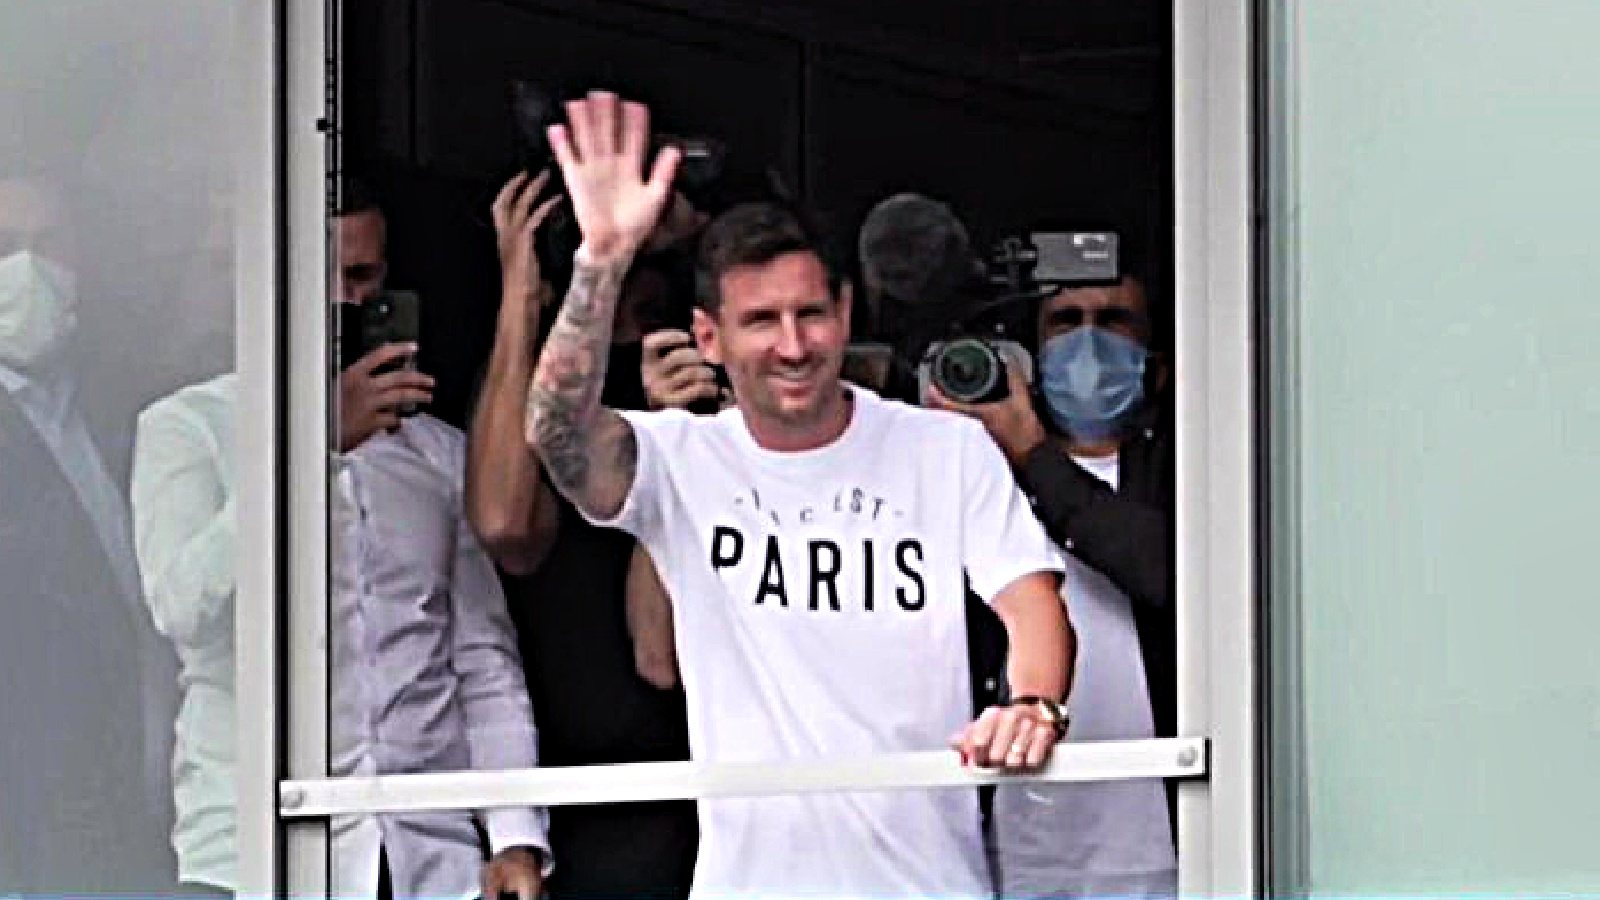 Watch: Lionel Messi waves at PSG fans from the window of Paris airport